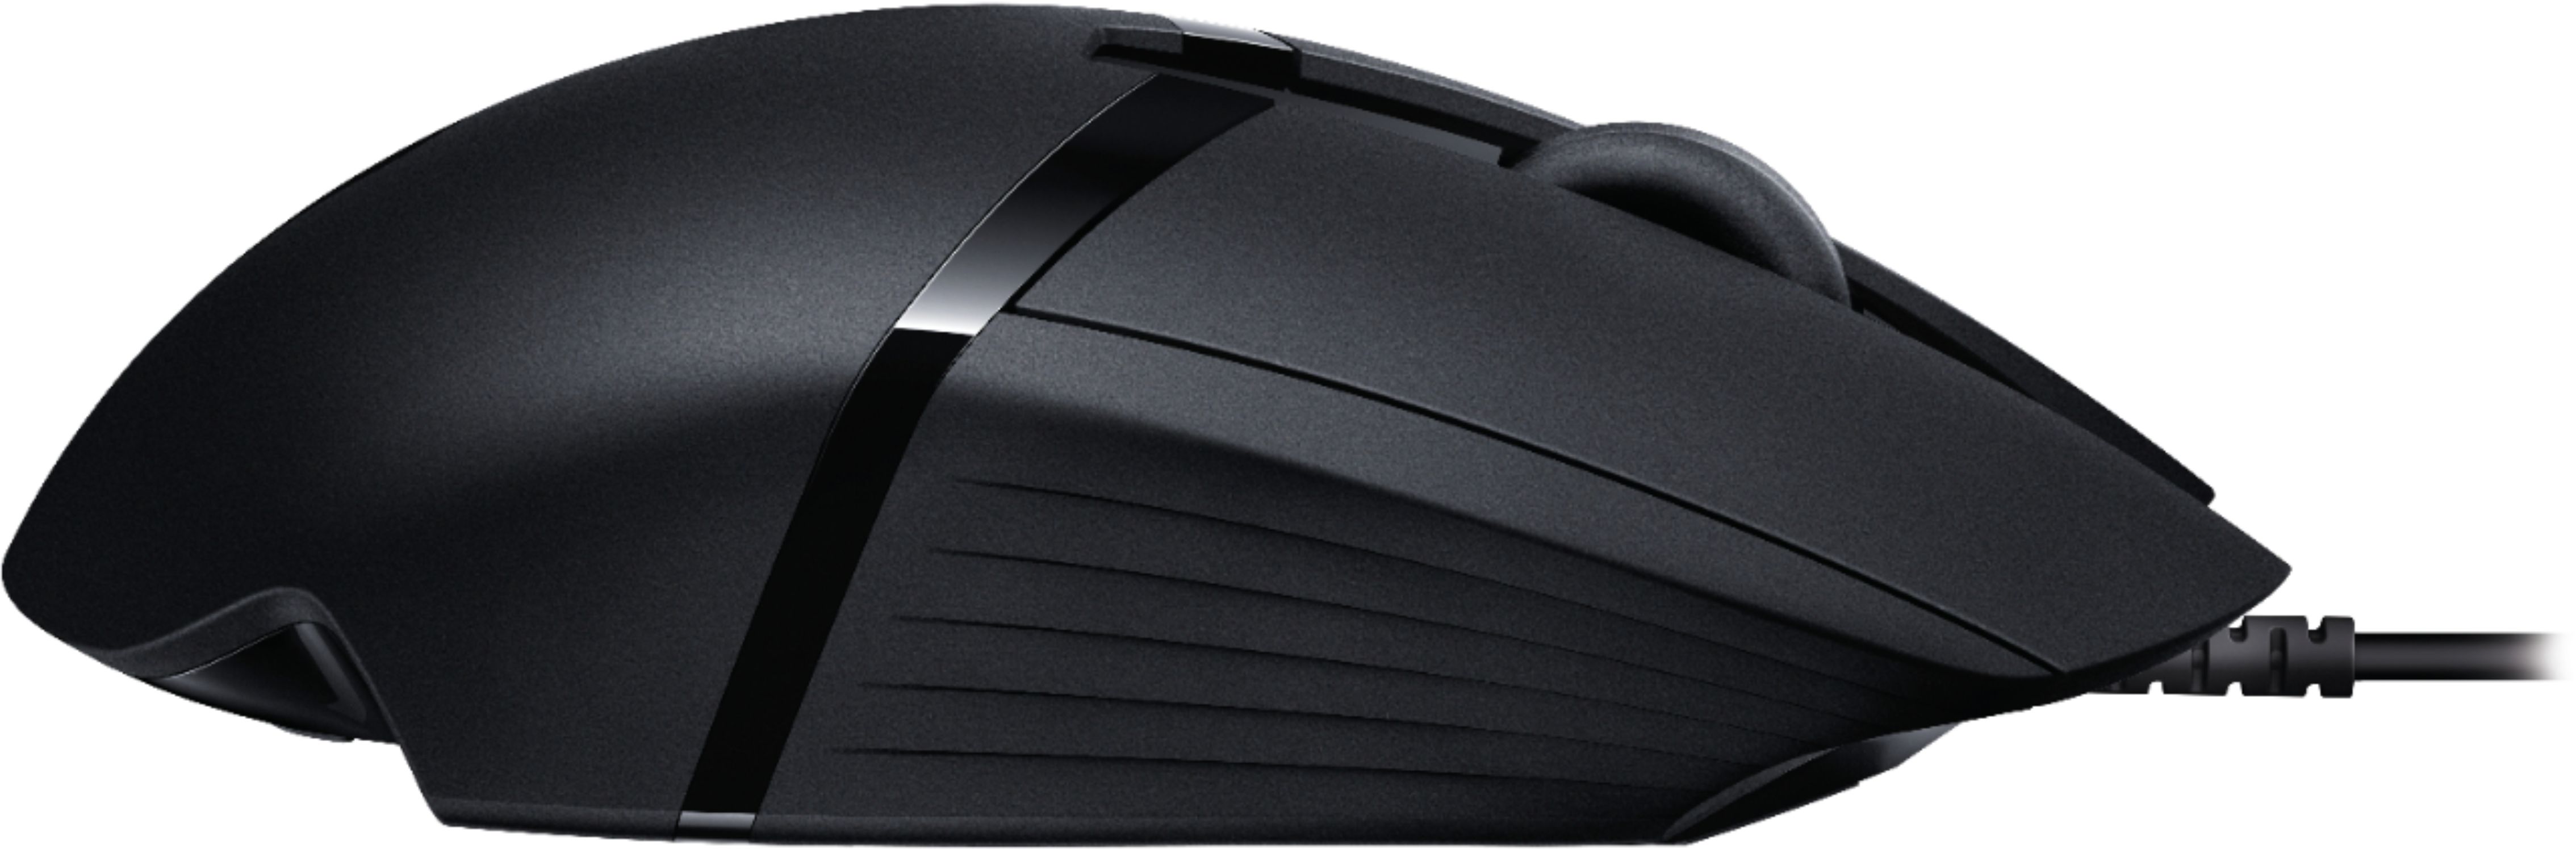 Best Buy Logitech G402 Hyperion Fury Optical Gaming Mouse Black 910 004069